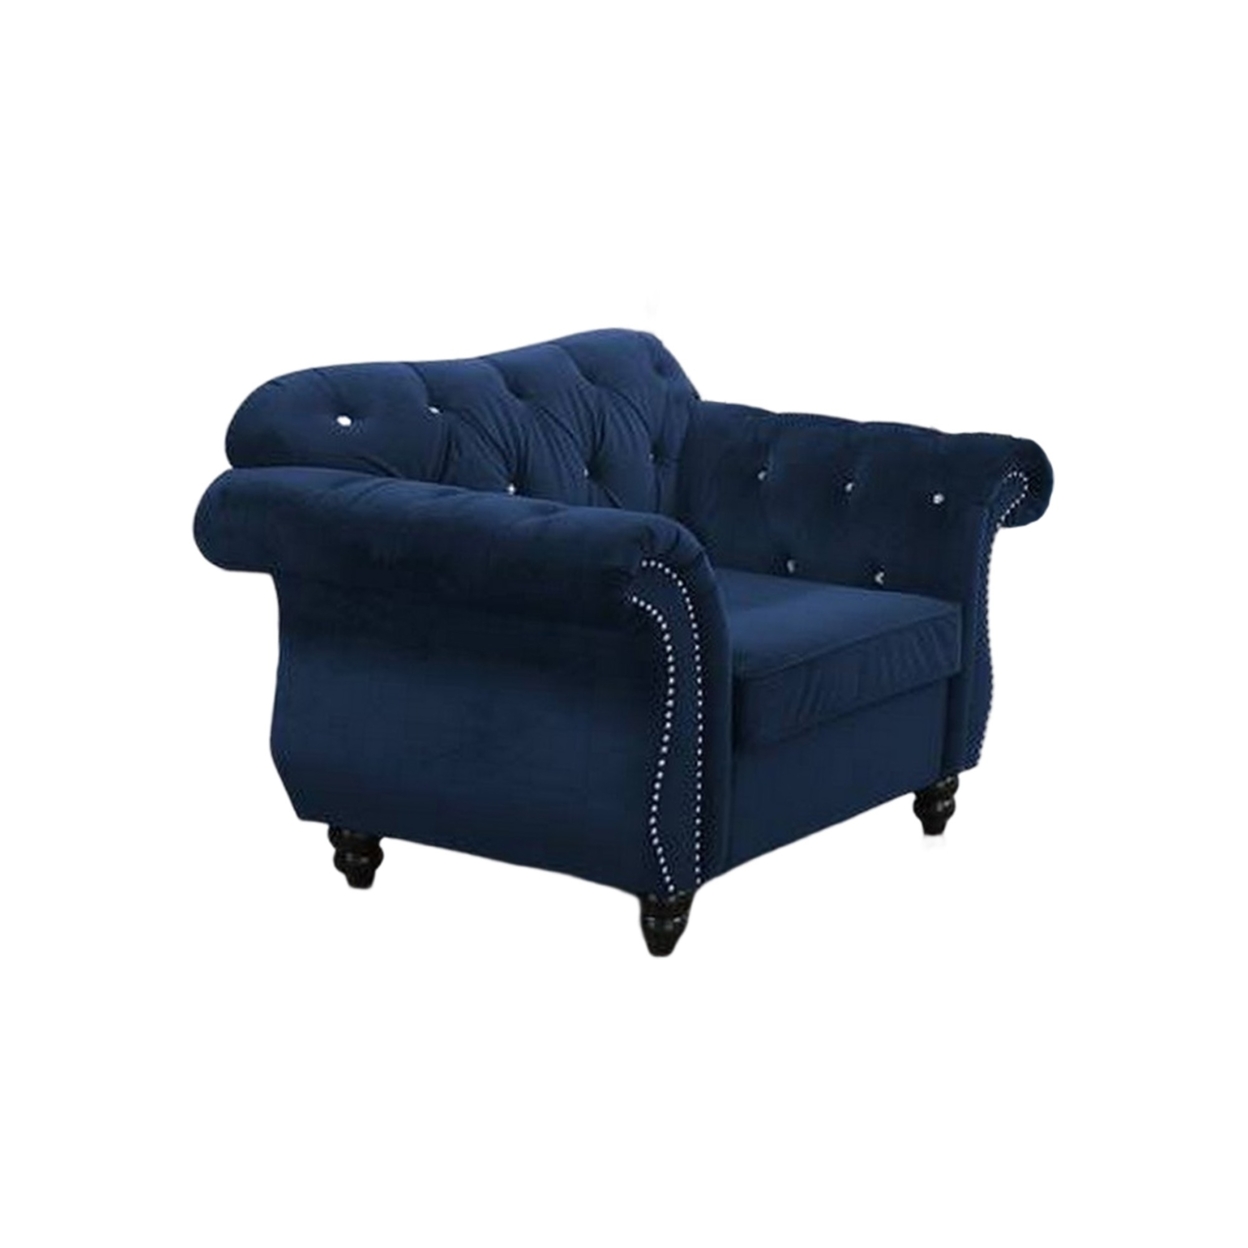 Rima 51 Inch Classic Accent Chair, Velvet Upholstery, Rolled Arms, Indigo